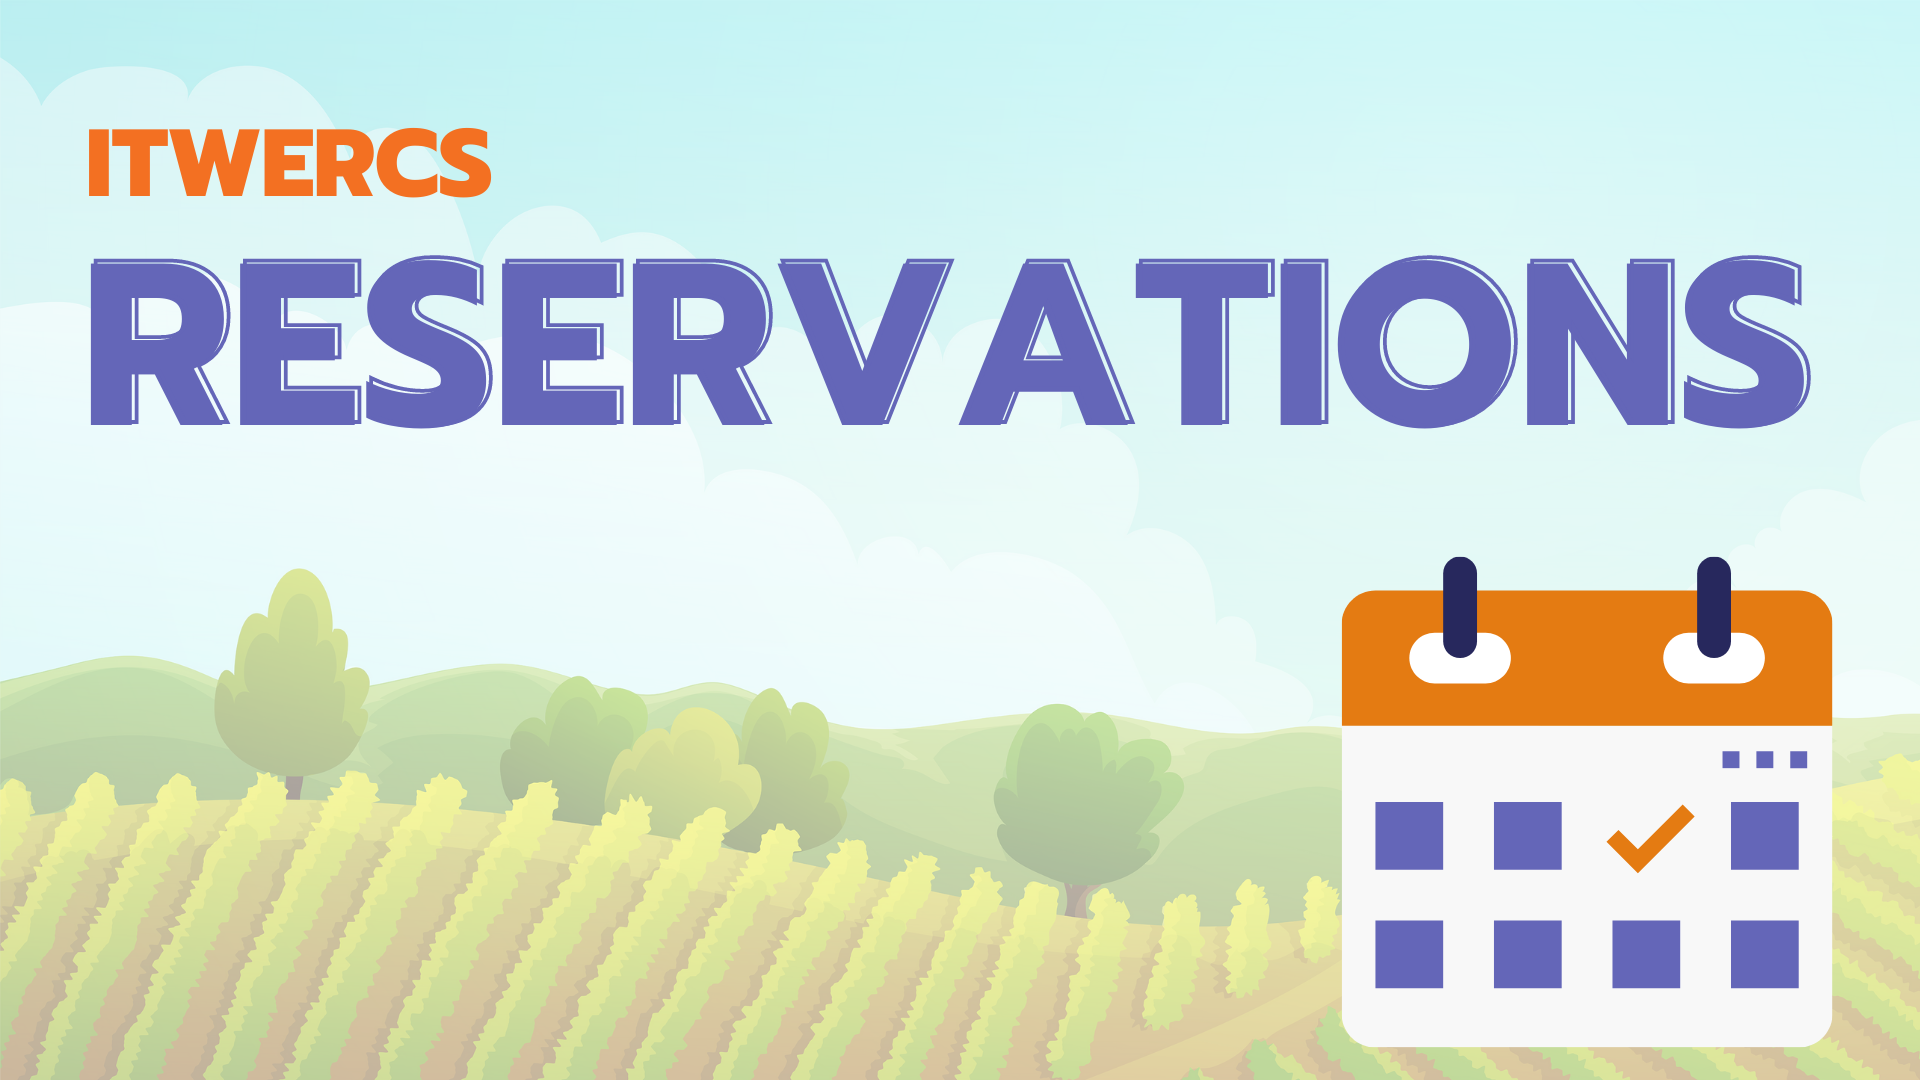 ITWERCS Reservations